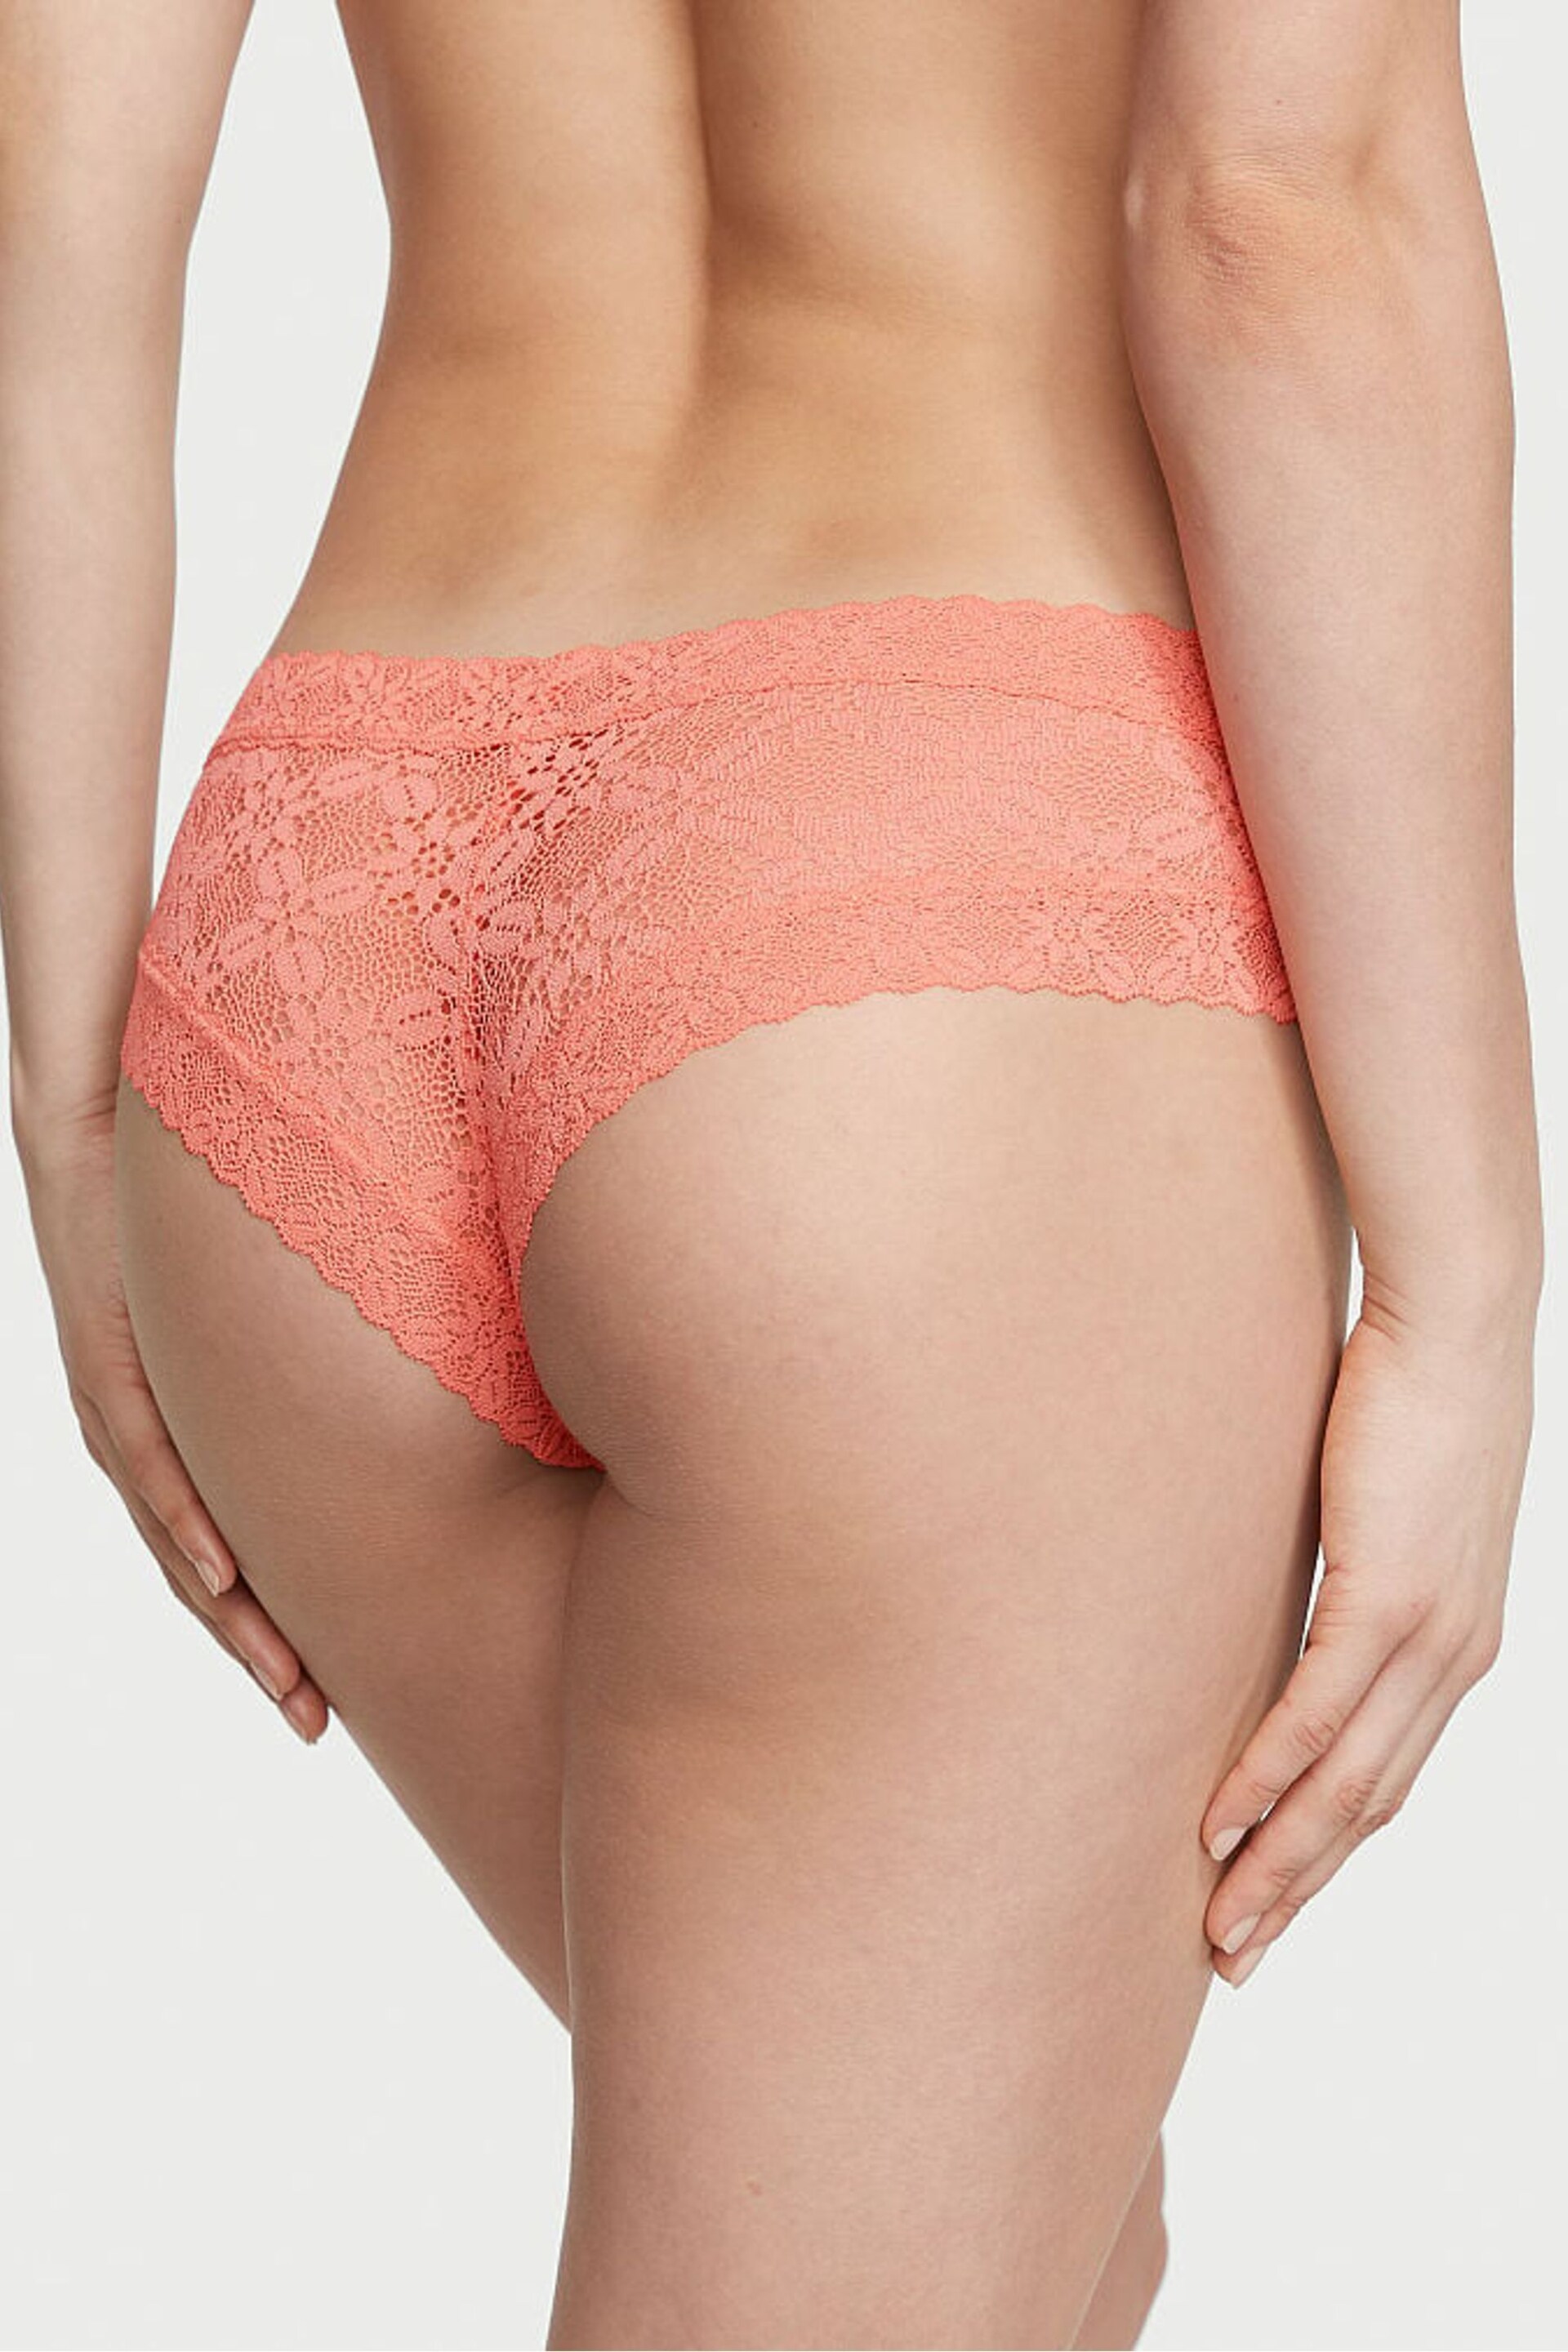 Victoria's Secret Punchy Peach Orange Festival Lace Cheeky Knickers - Image 2 of 3